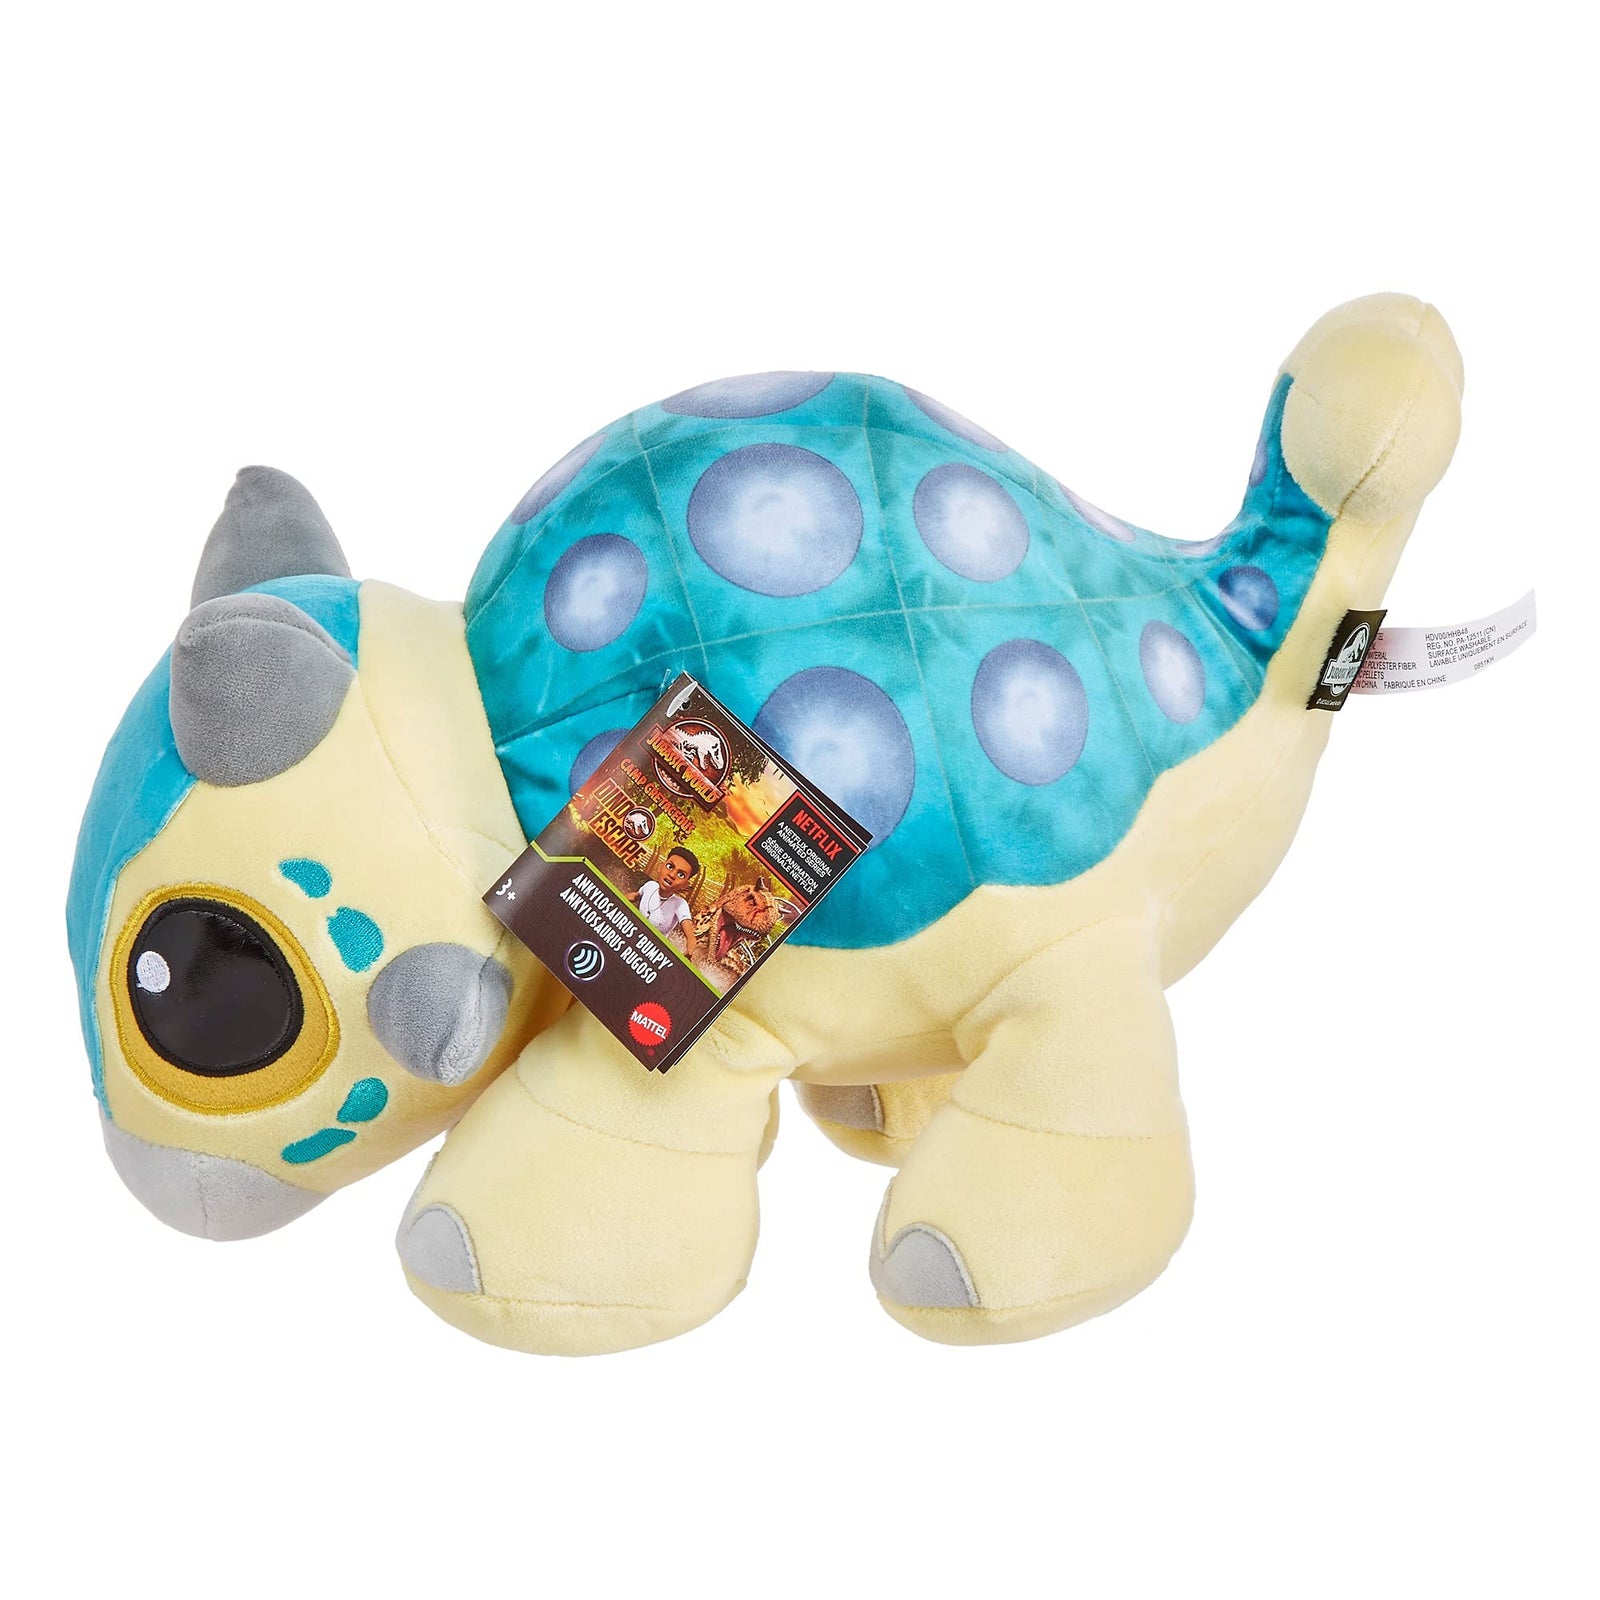 Jurassic World Feature Plush Ankylosaurus Bumpy Baby Dinosaur Toy with Roar Sound & Floppy Legs; Camp Cretaceous Soft Doll Play or Nap Buddy, Gift for Kids Ages 3 Years & Older [Amazon Exclusive]